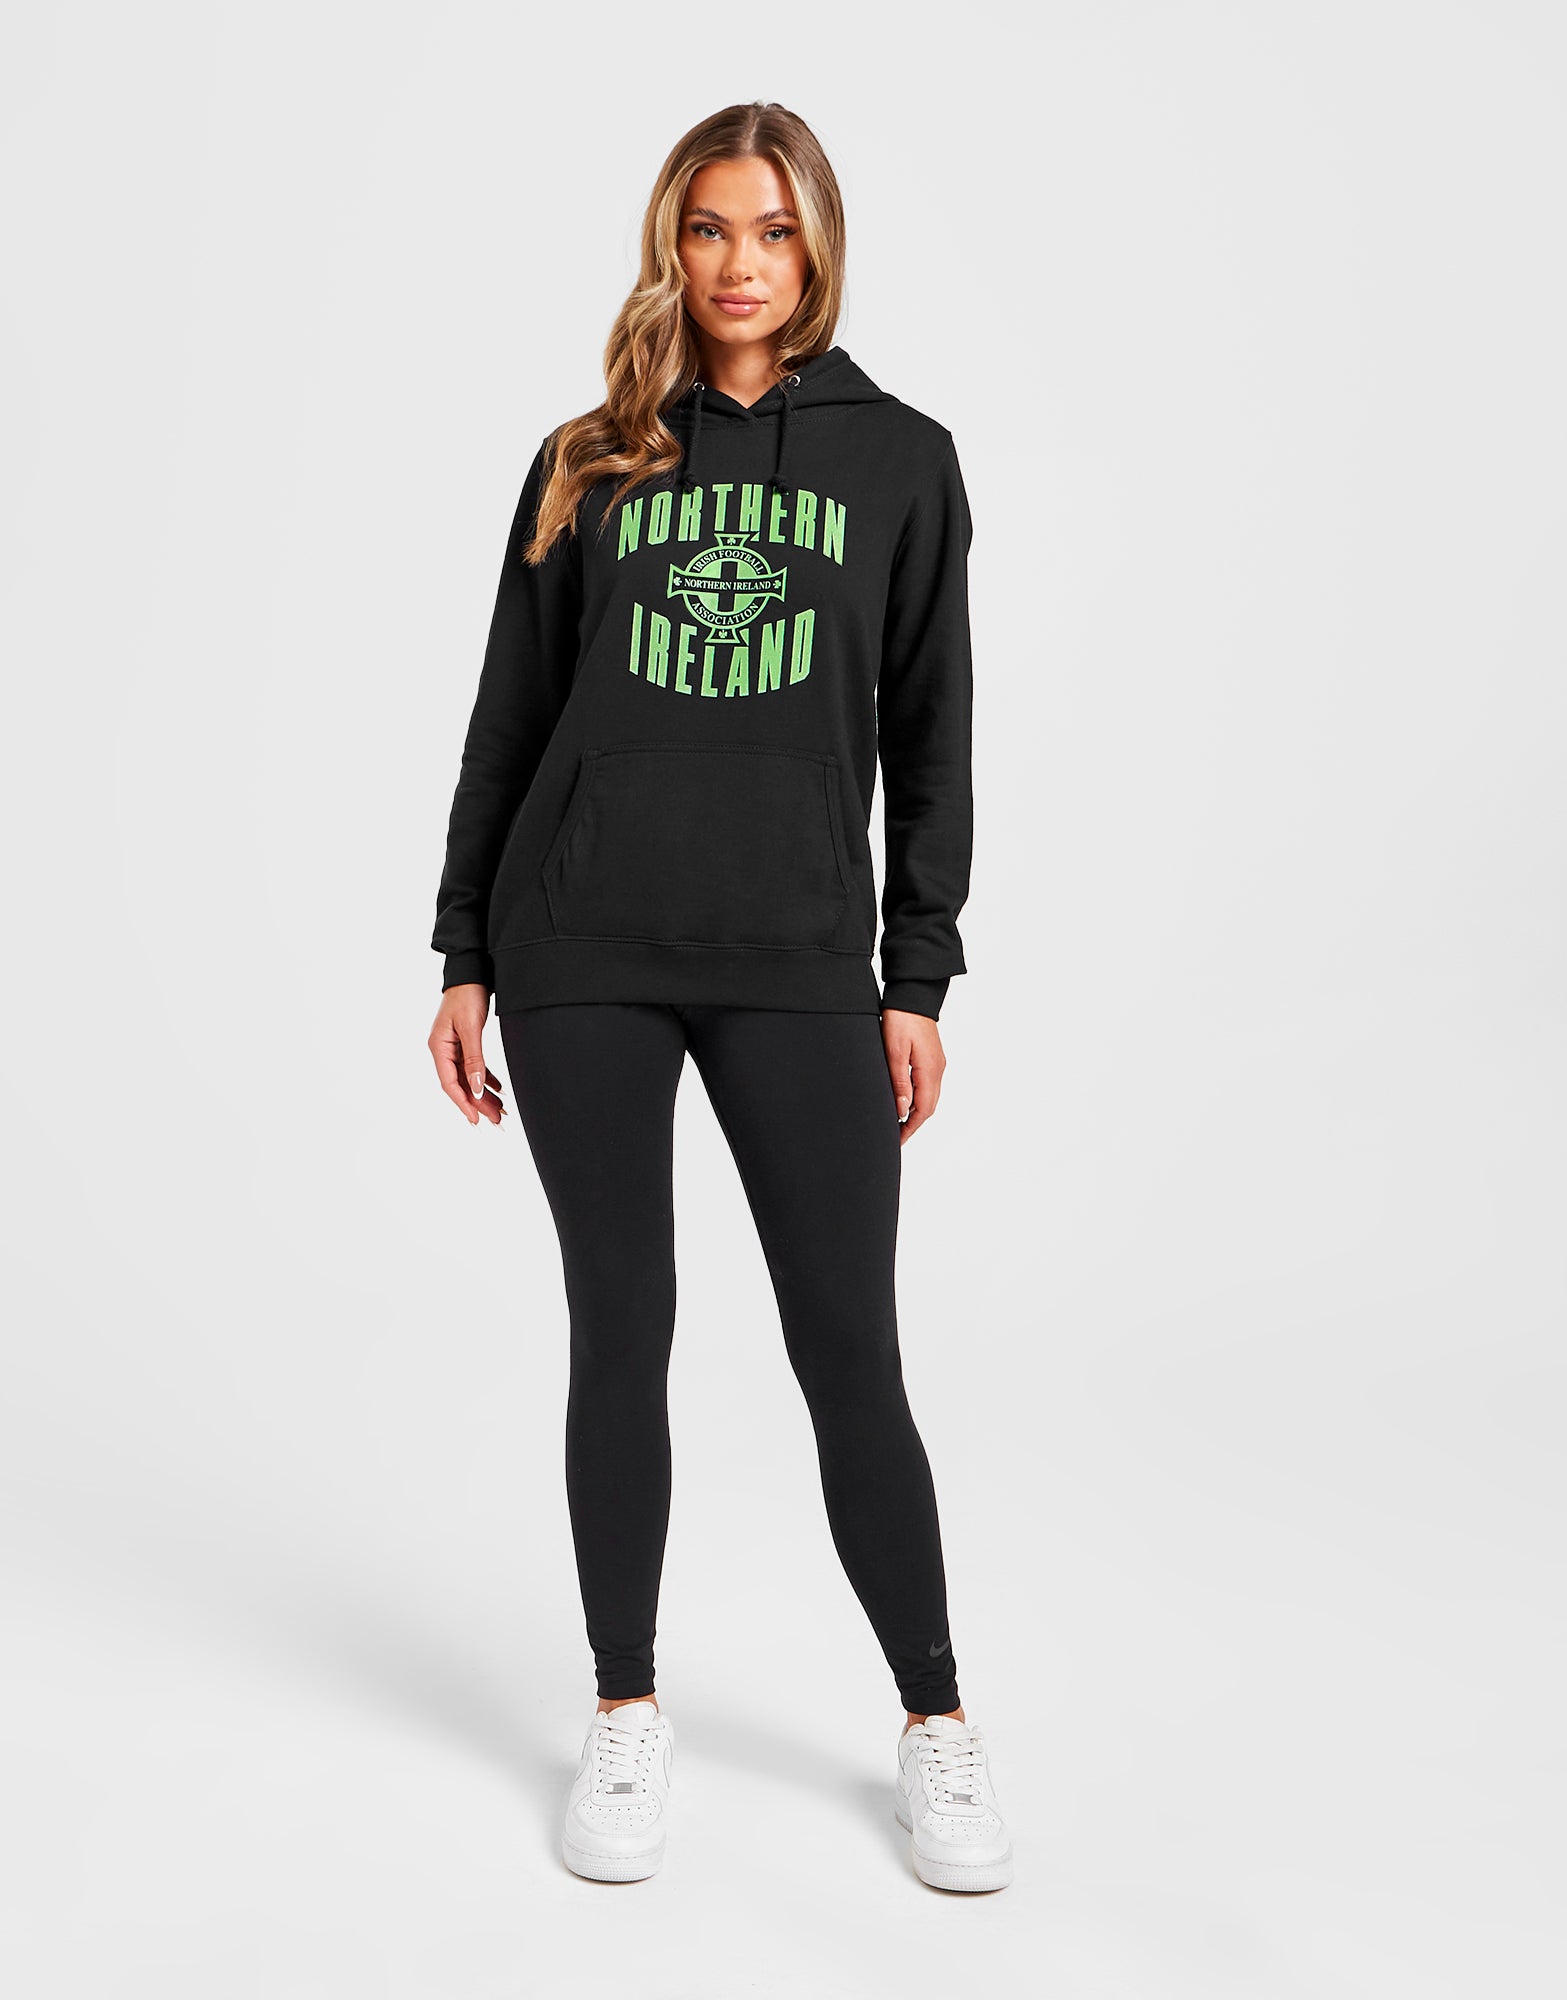 Official Northern Ireland Crest Graphic Hoodie Womens - Navy - The World Football Store